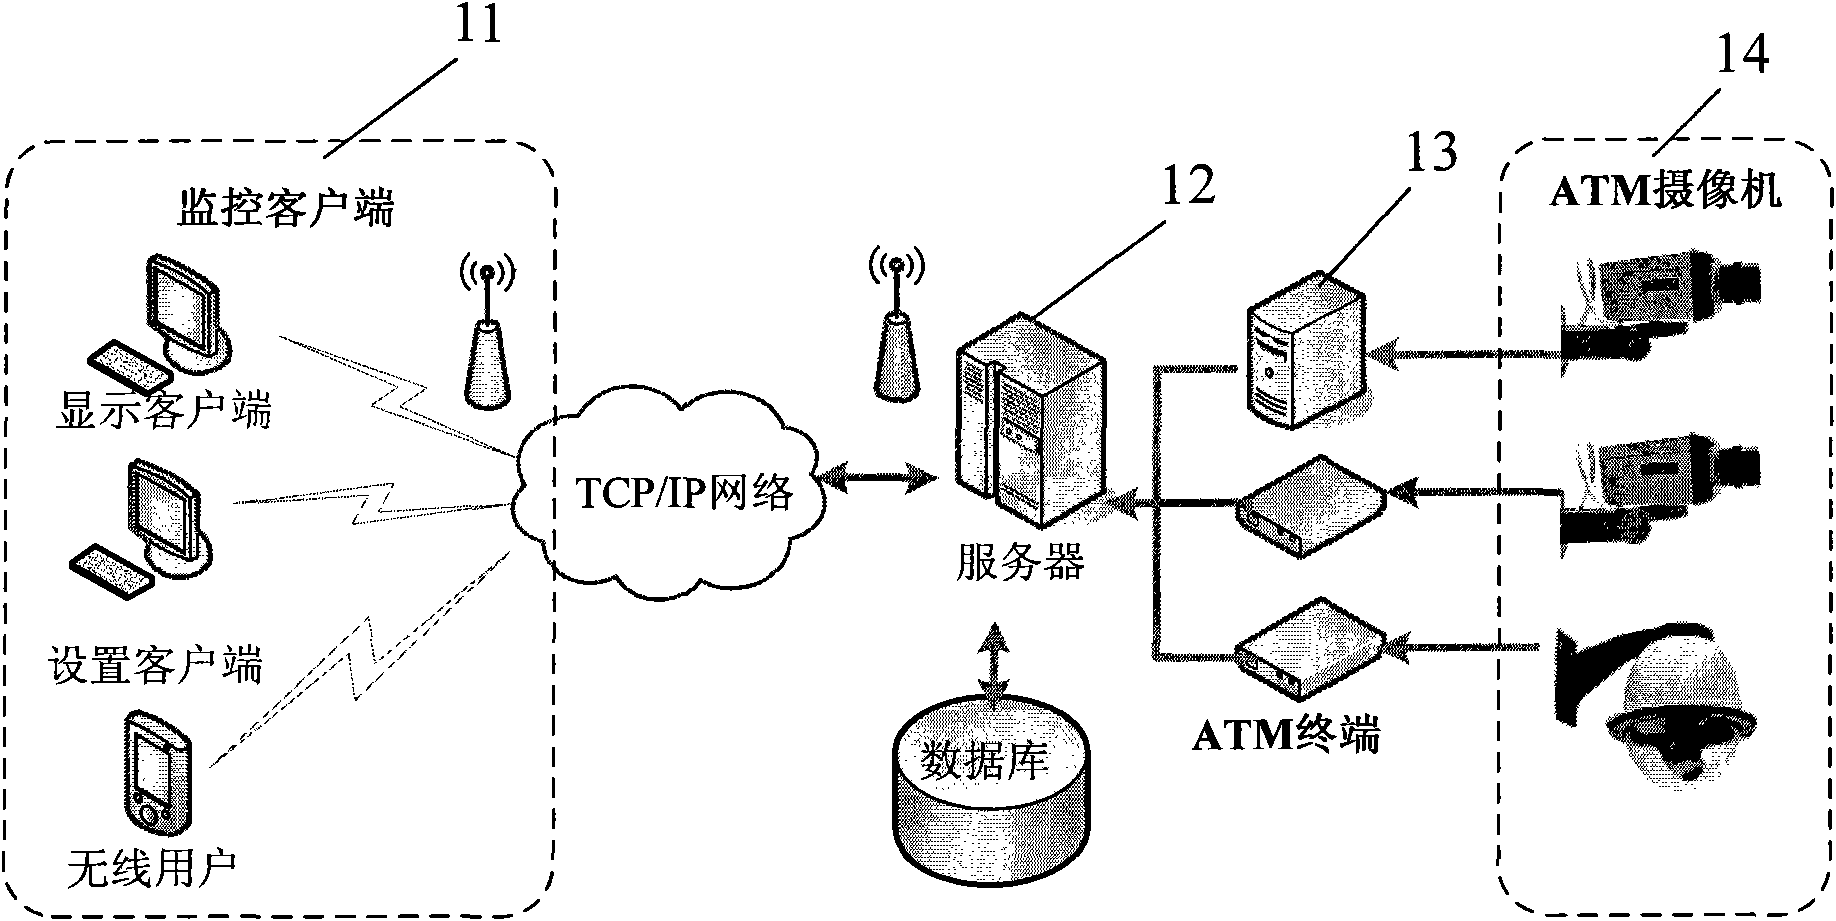 ATM (Automatic teller machine) self-service bank monitoring system and method